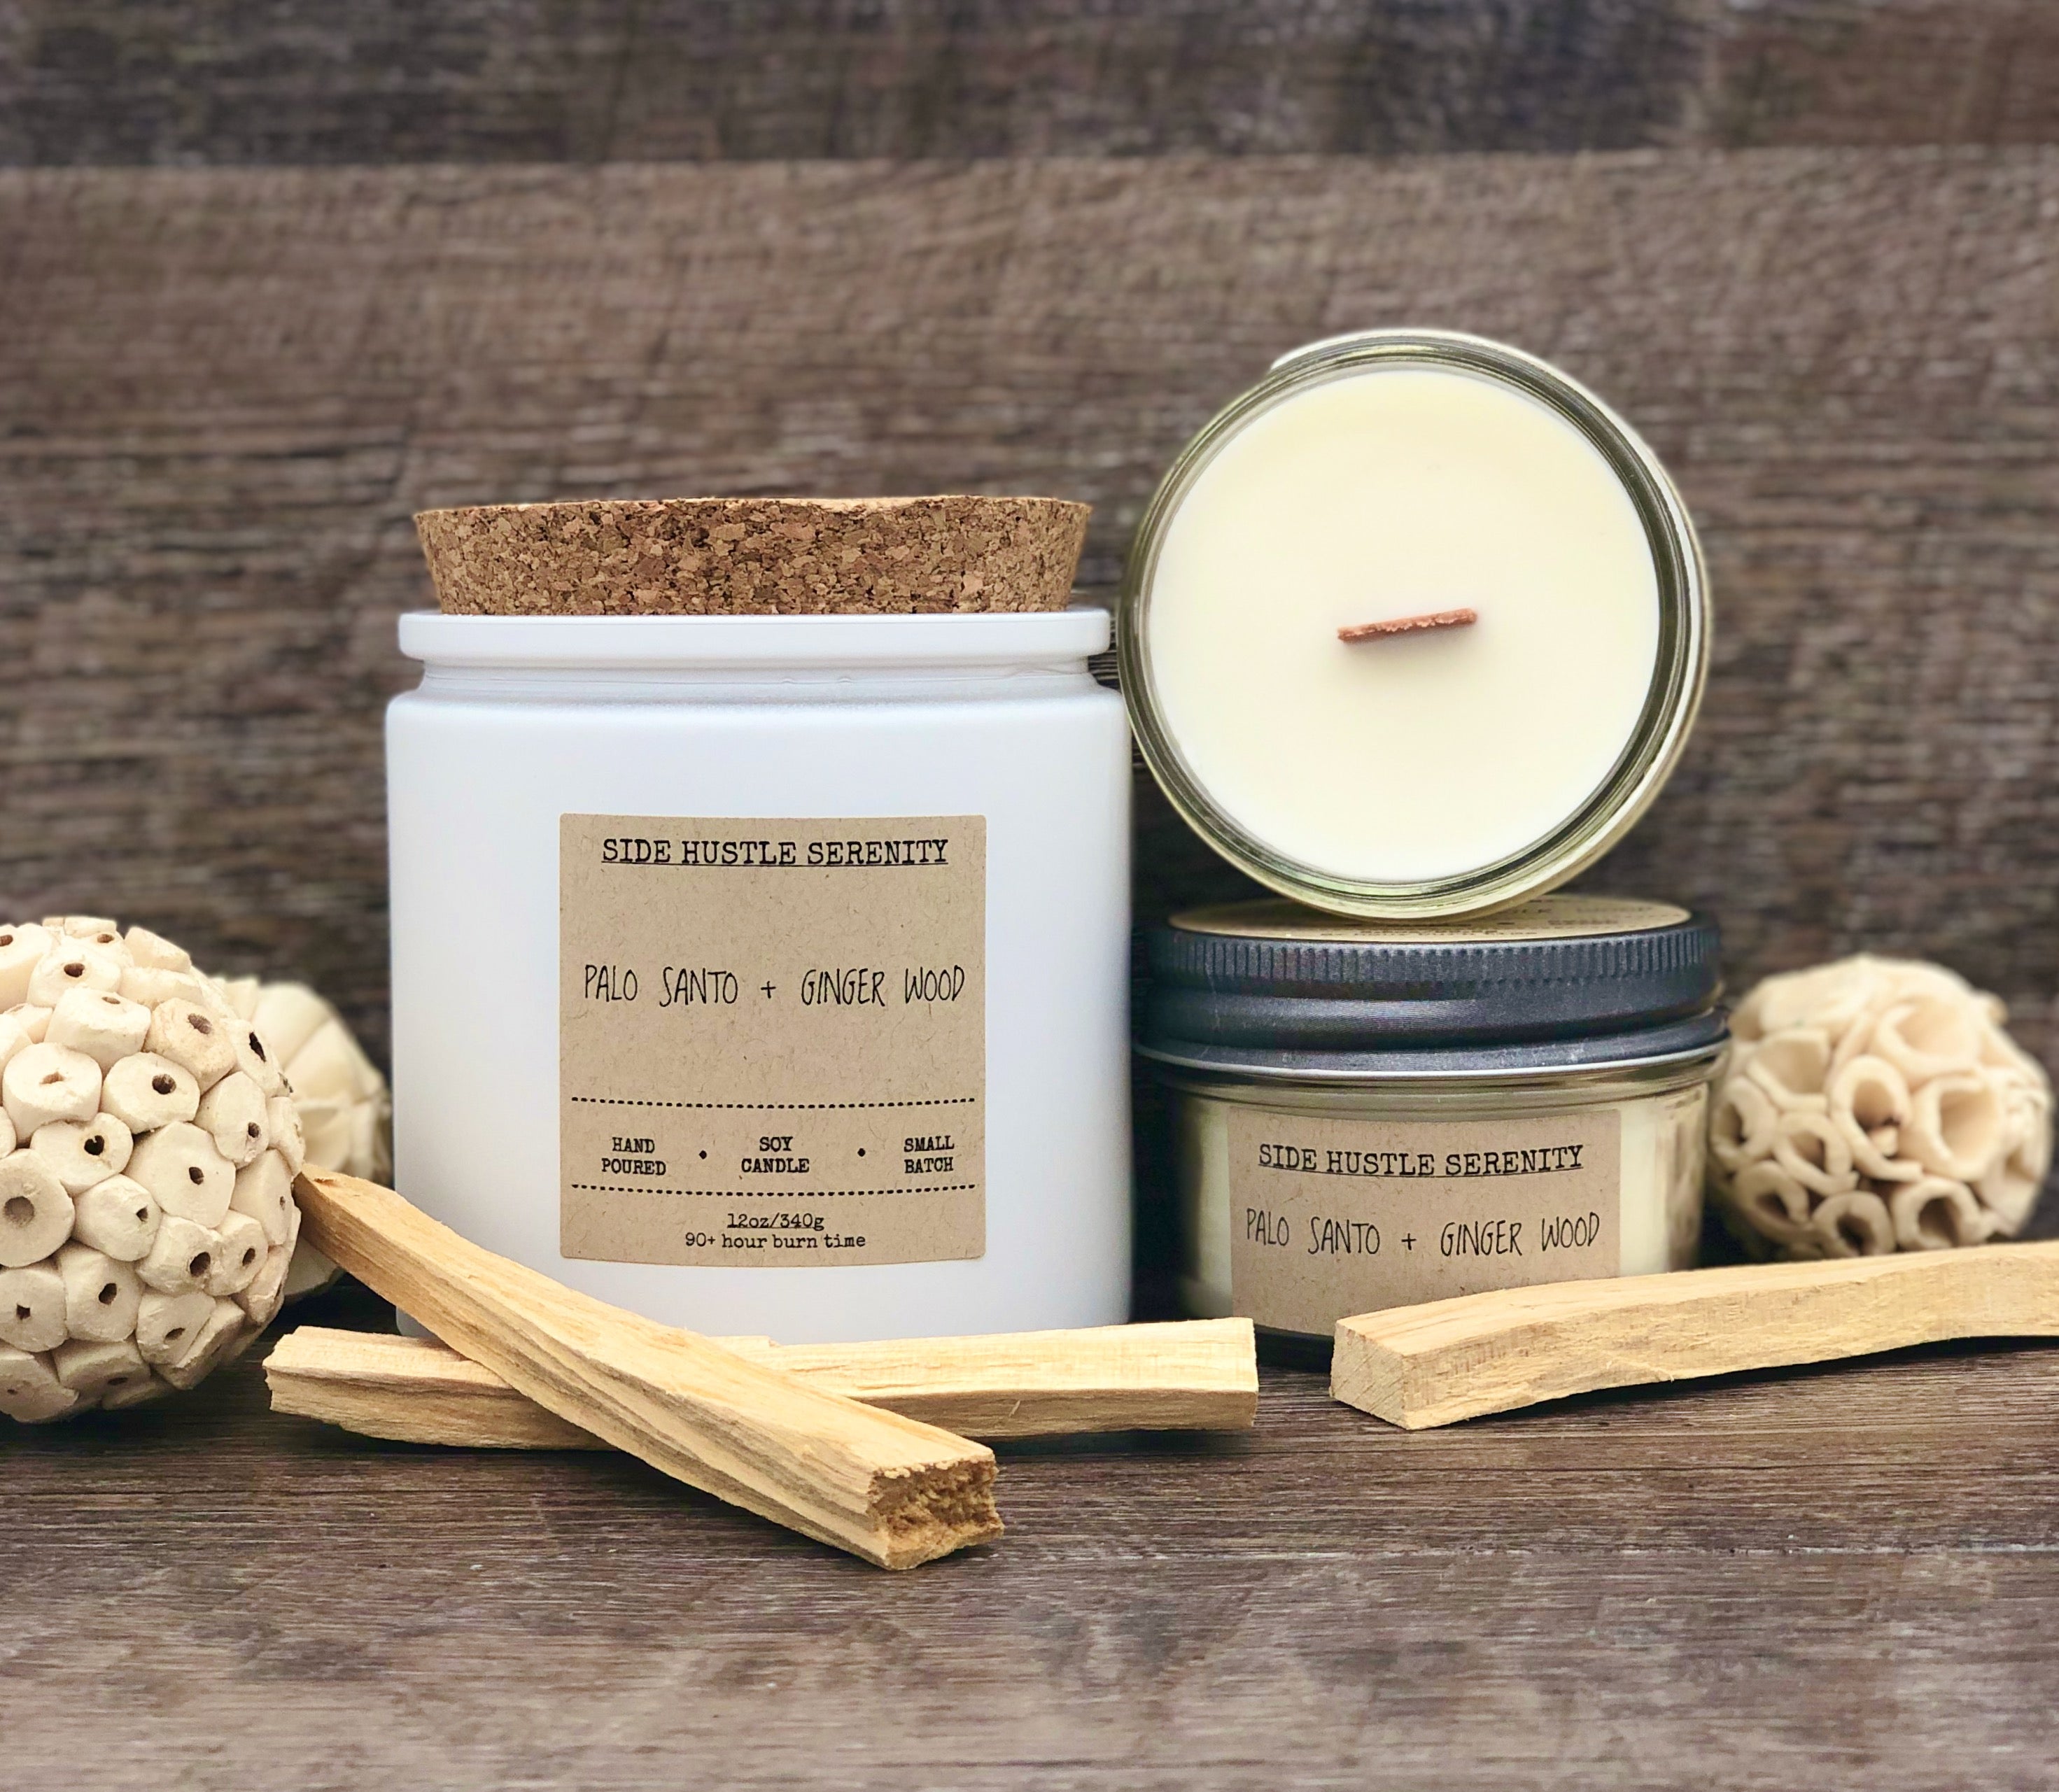 Palo Santo + Ginger Wood Scented Soy Candle - Side Hustle Serenity